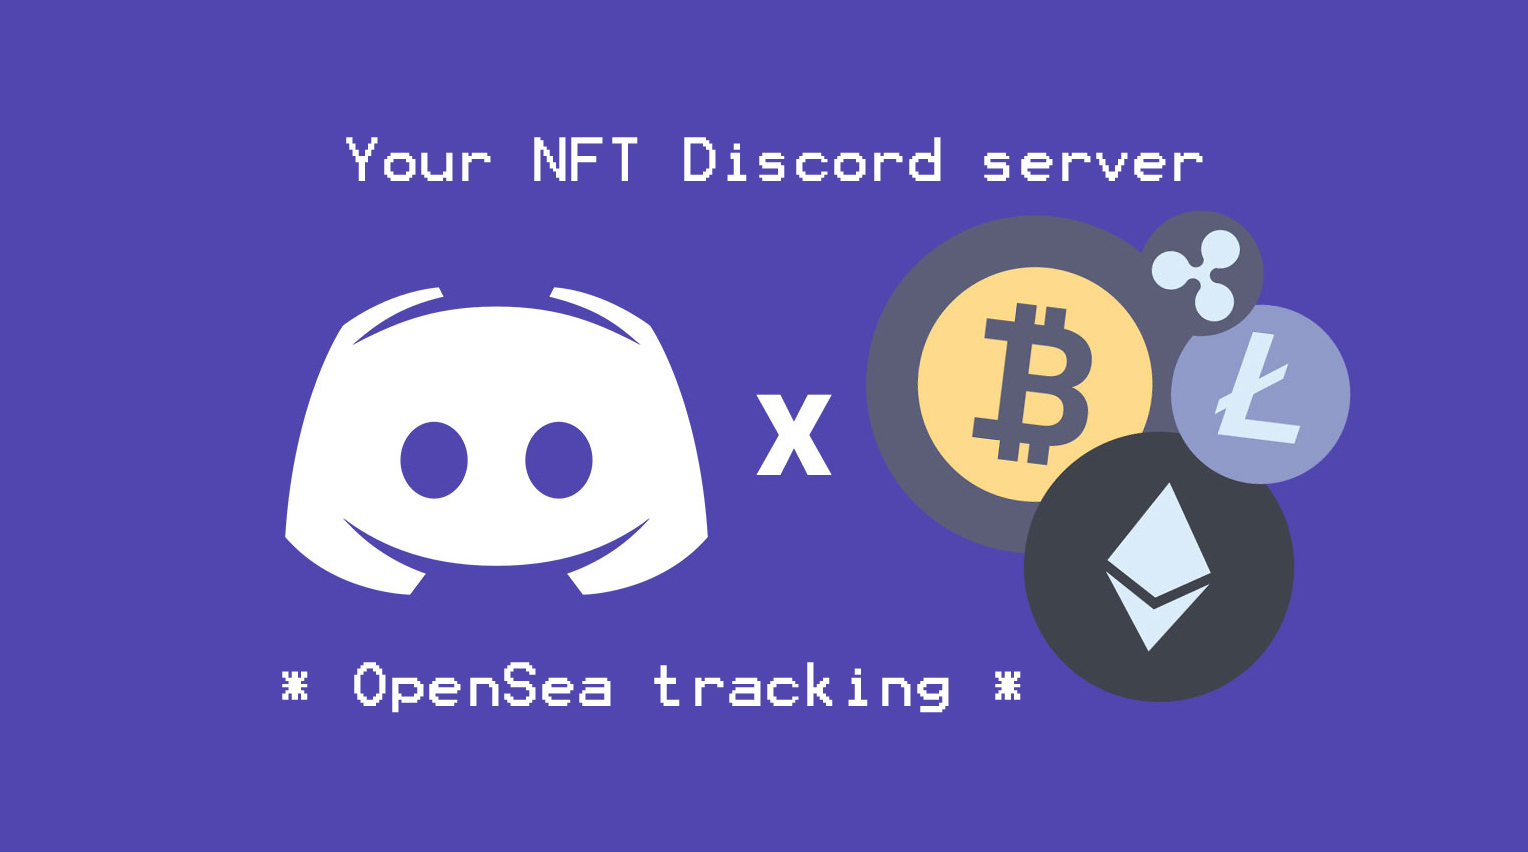 Let me create your NFT discord server